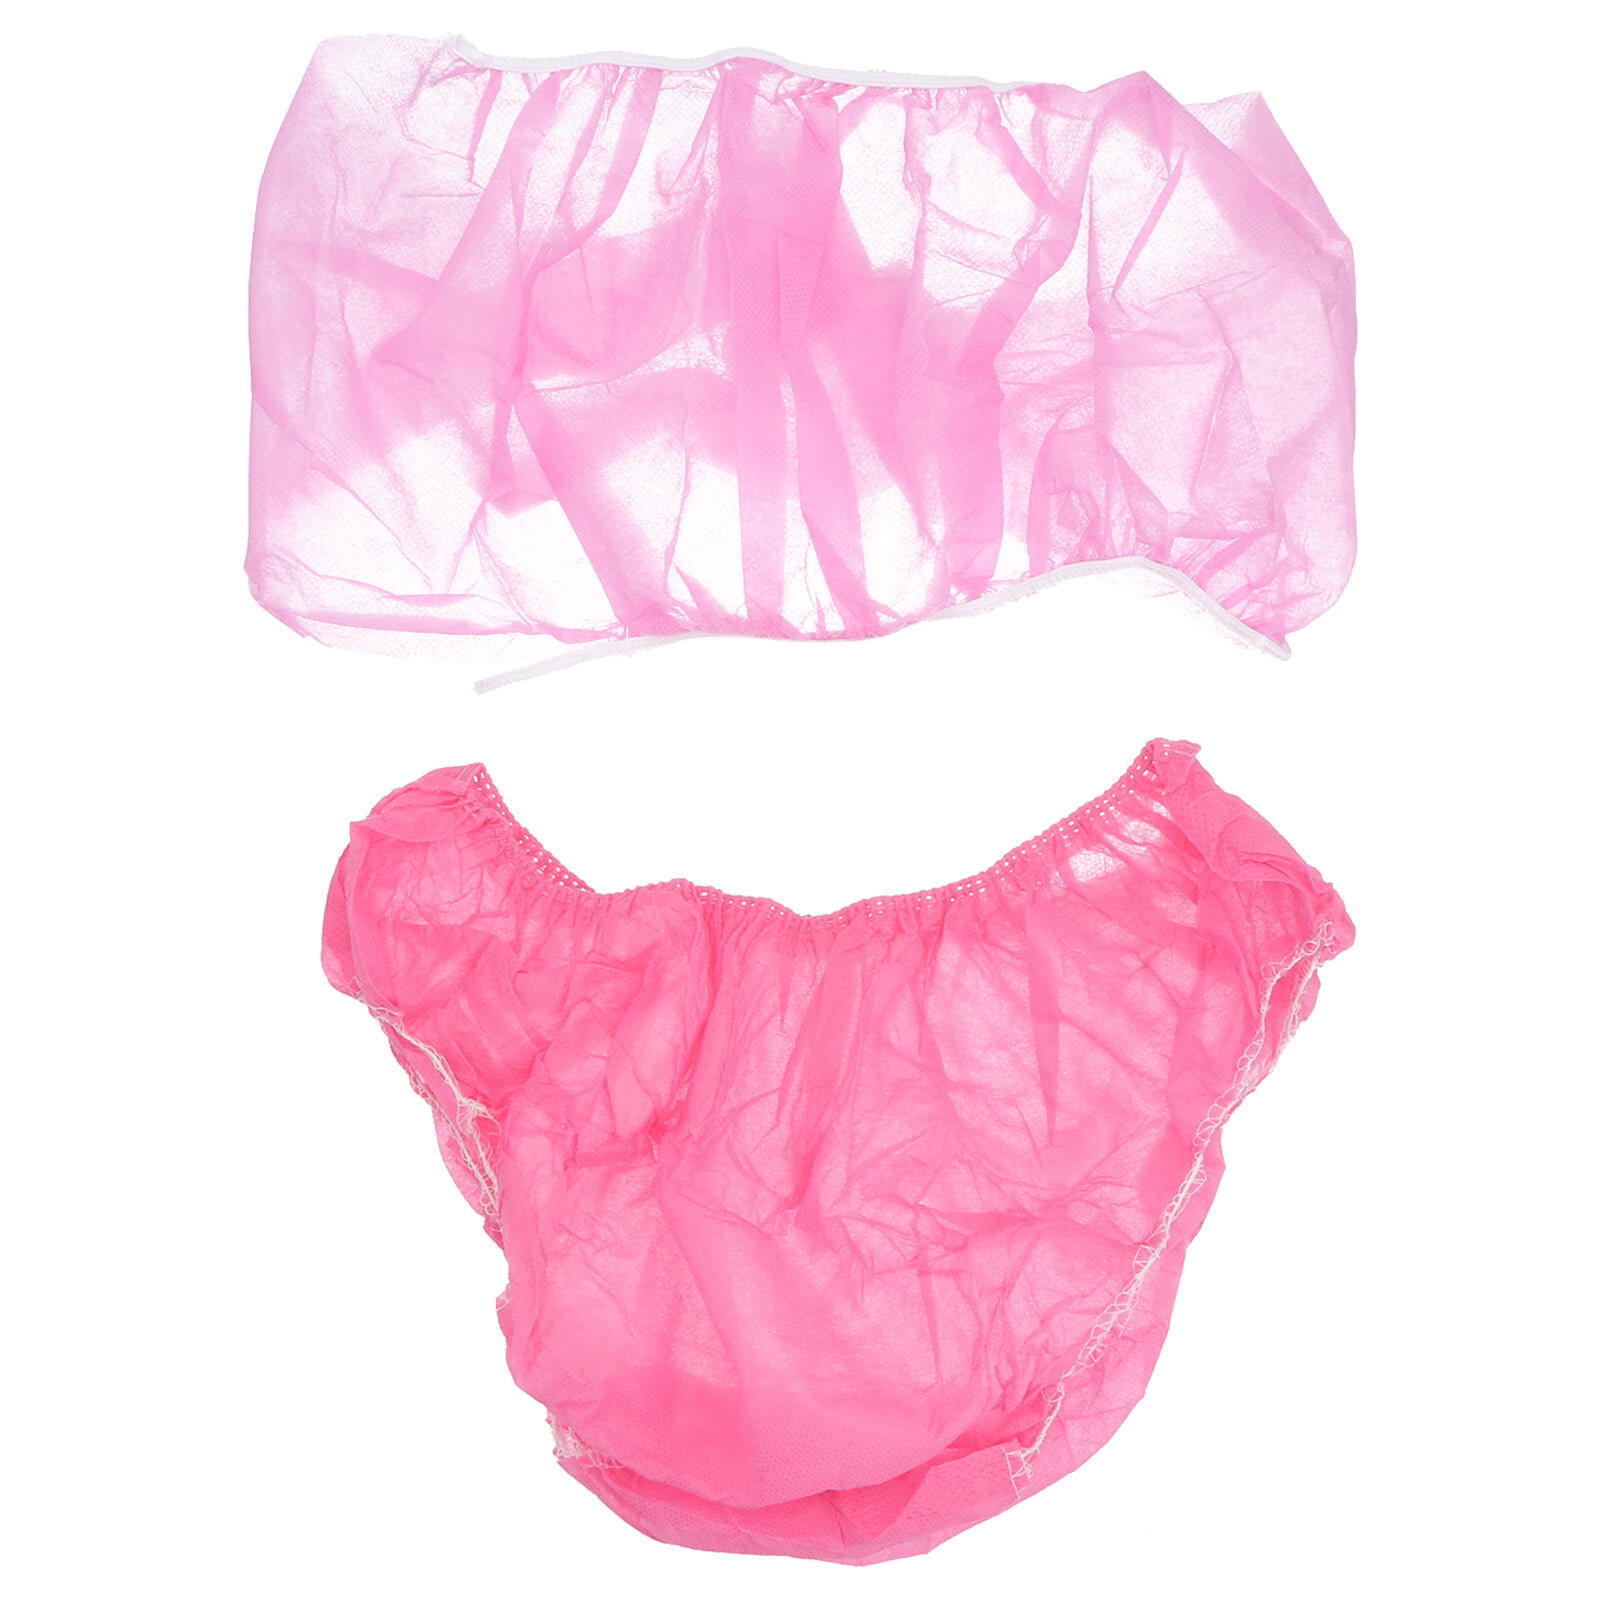 NUOLUX 5 sets of Disposable Non-Woven Underwear Disposable